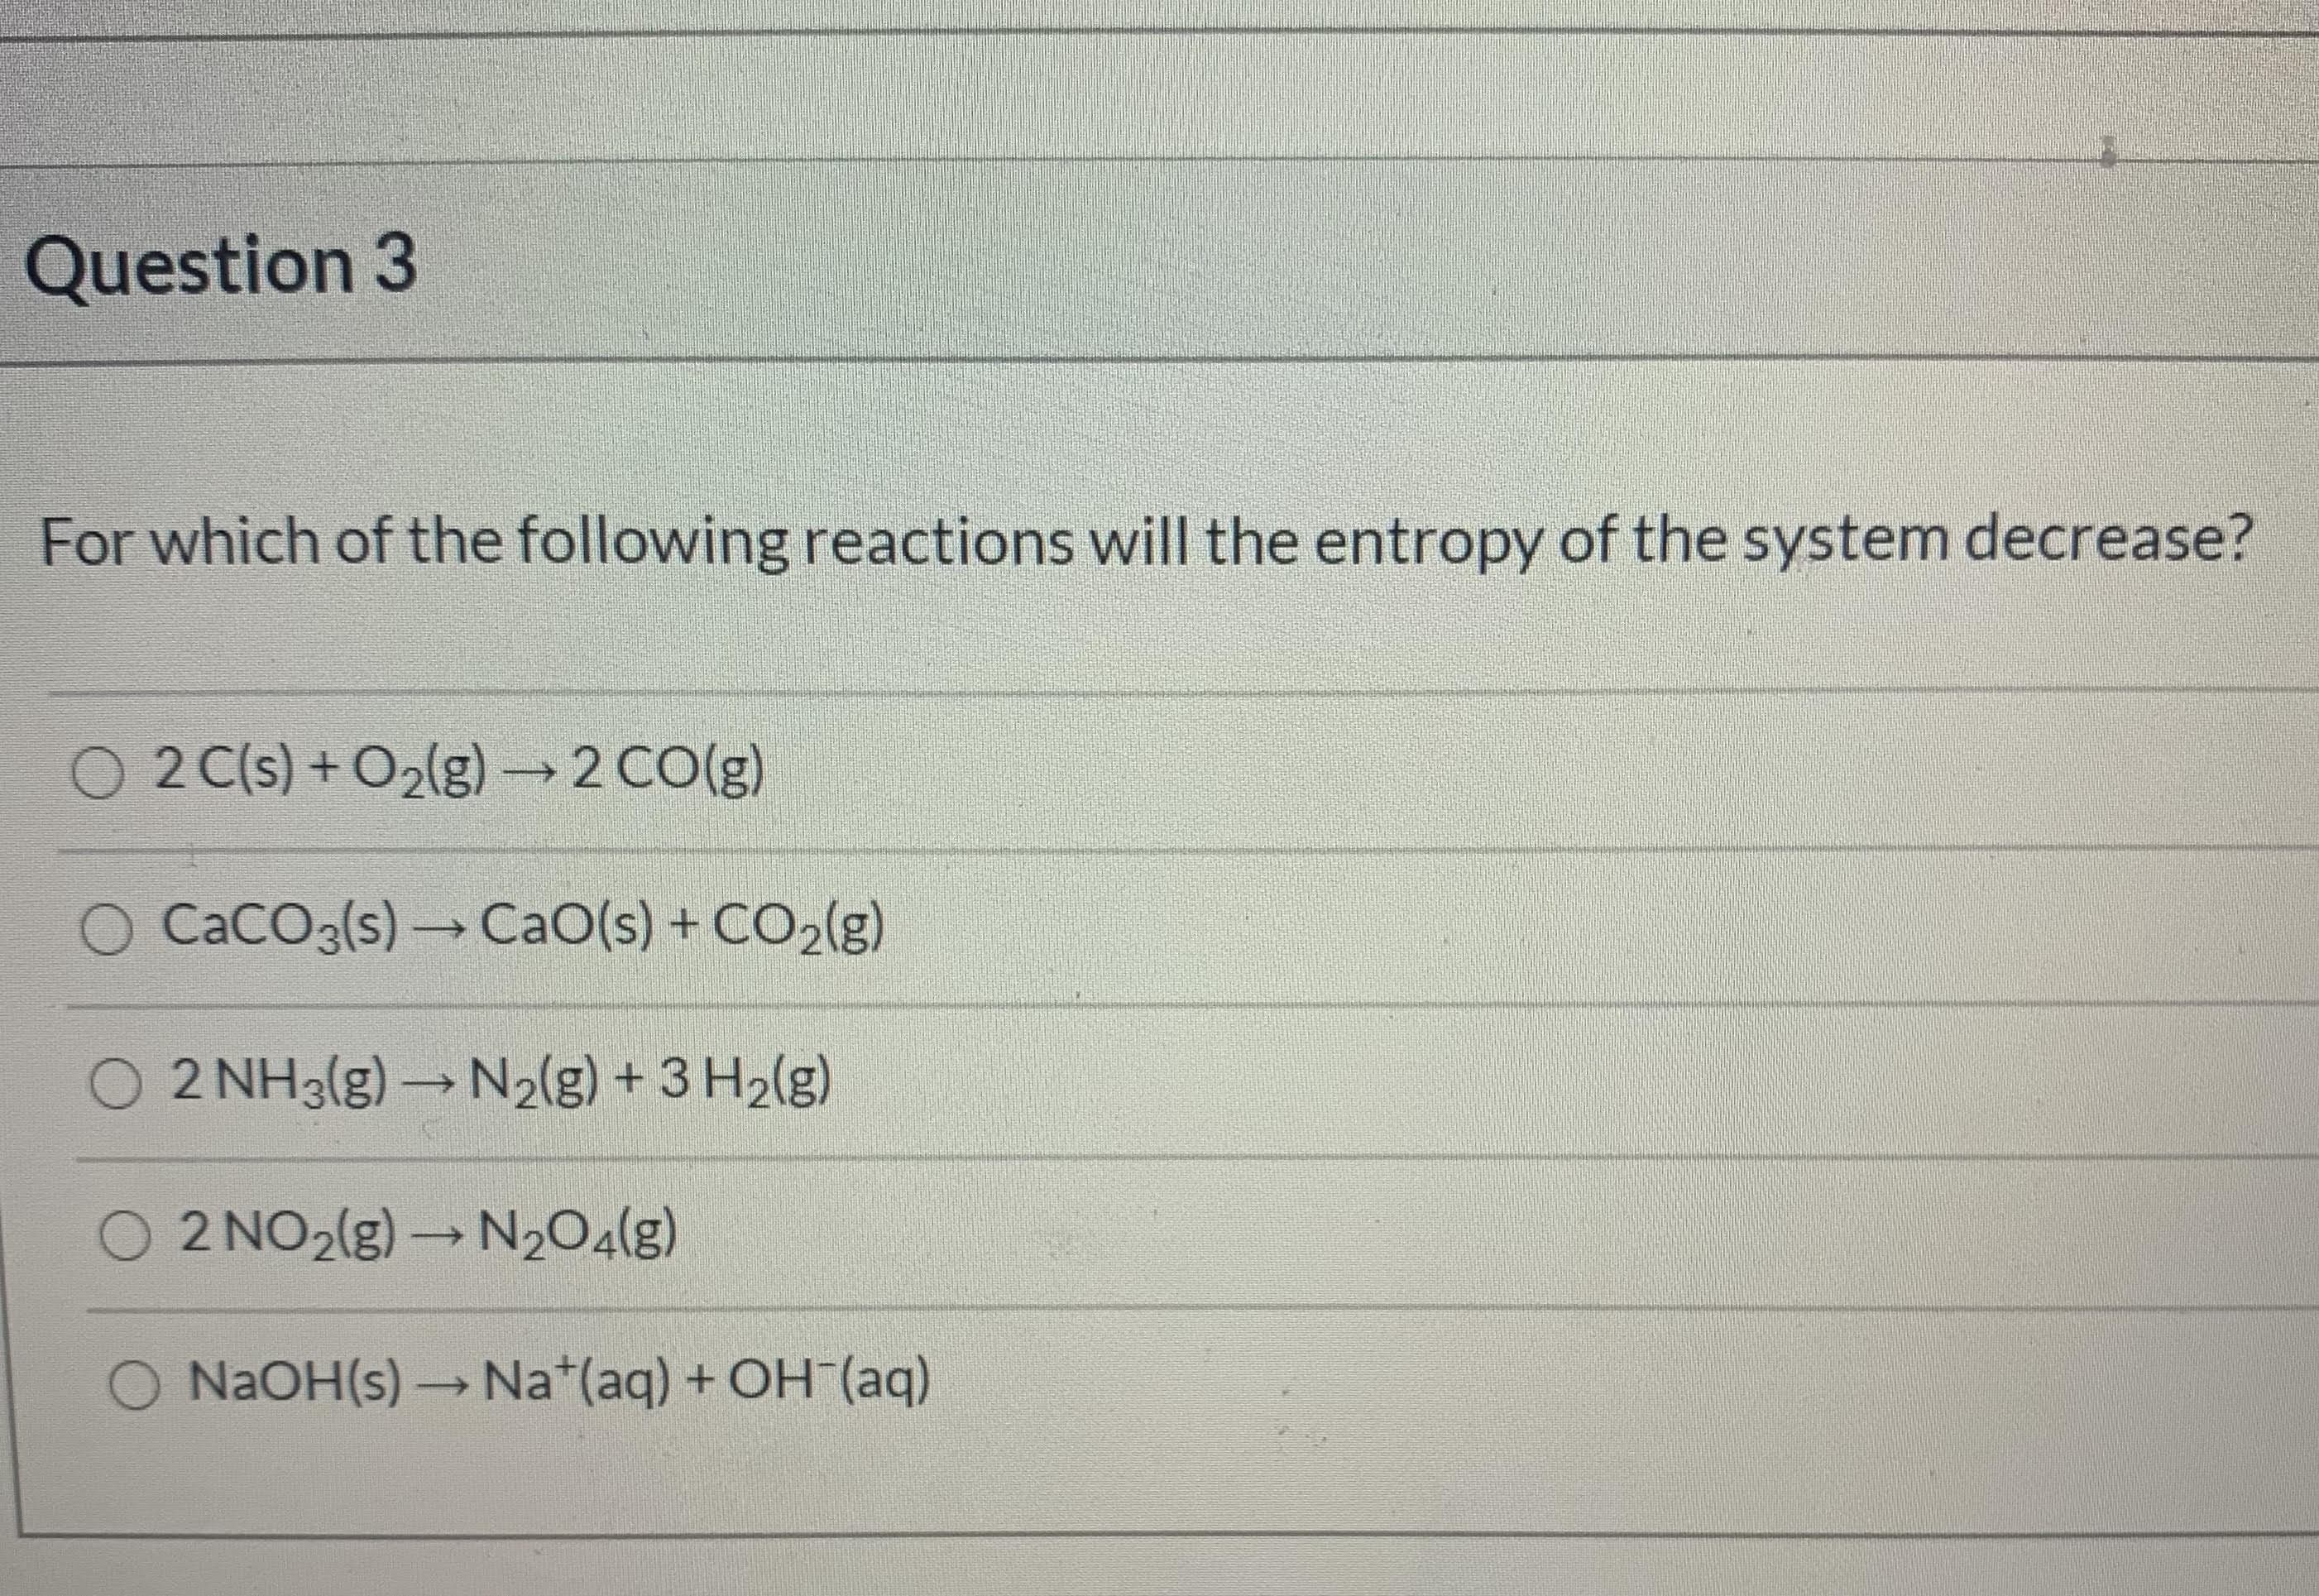 For which of the following reactions will the entropy of the system decrease?
